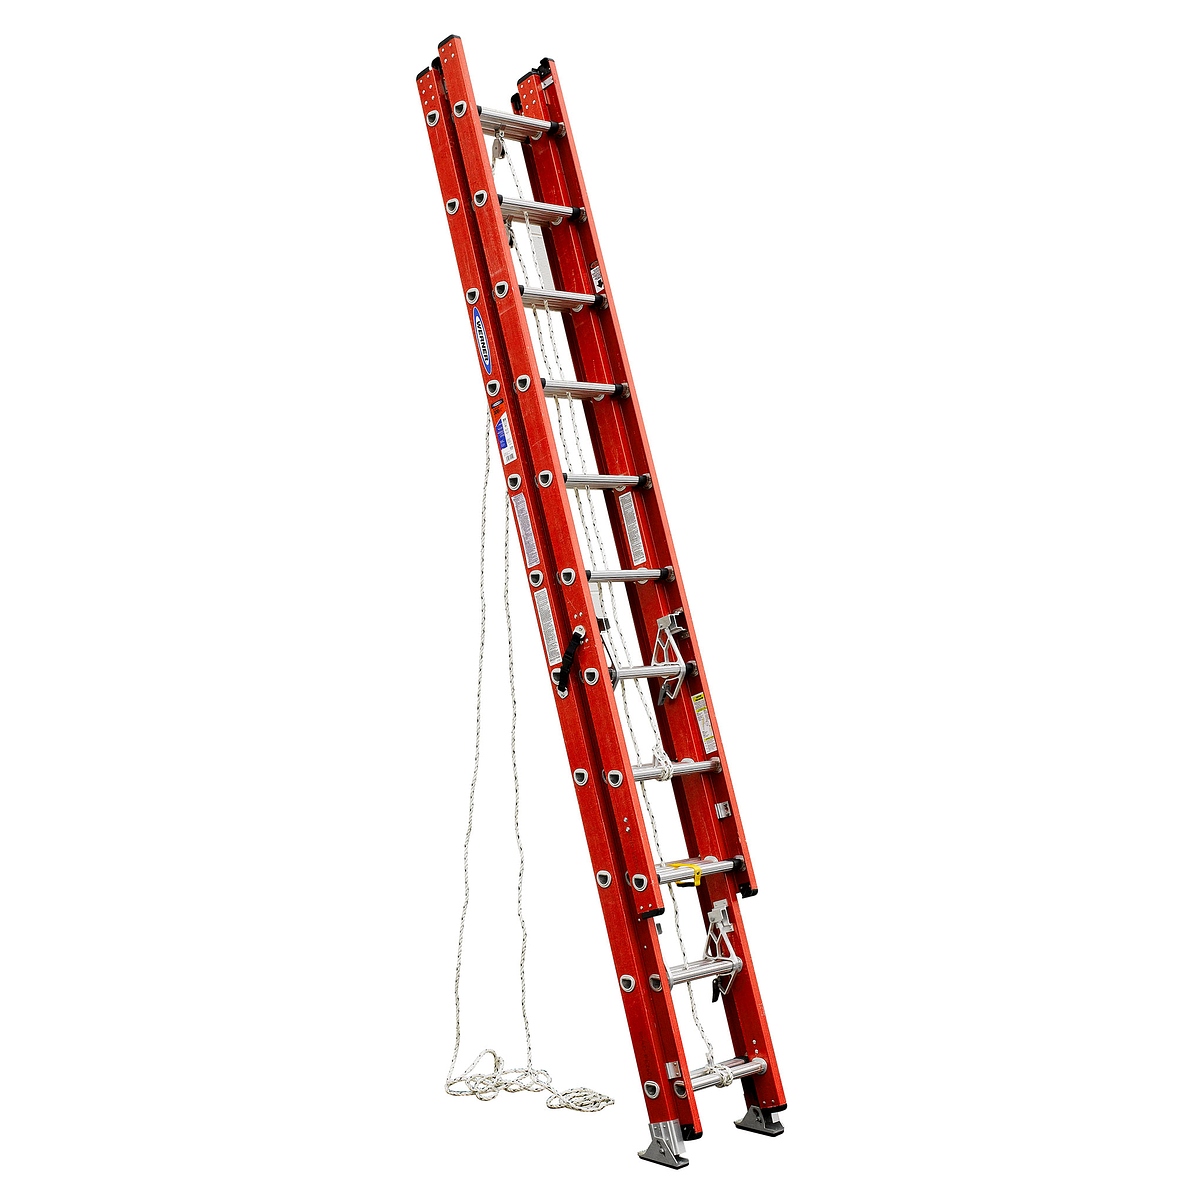 Which Part Of An Extension Ladder Locks The Fly Section Into Position